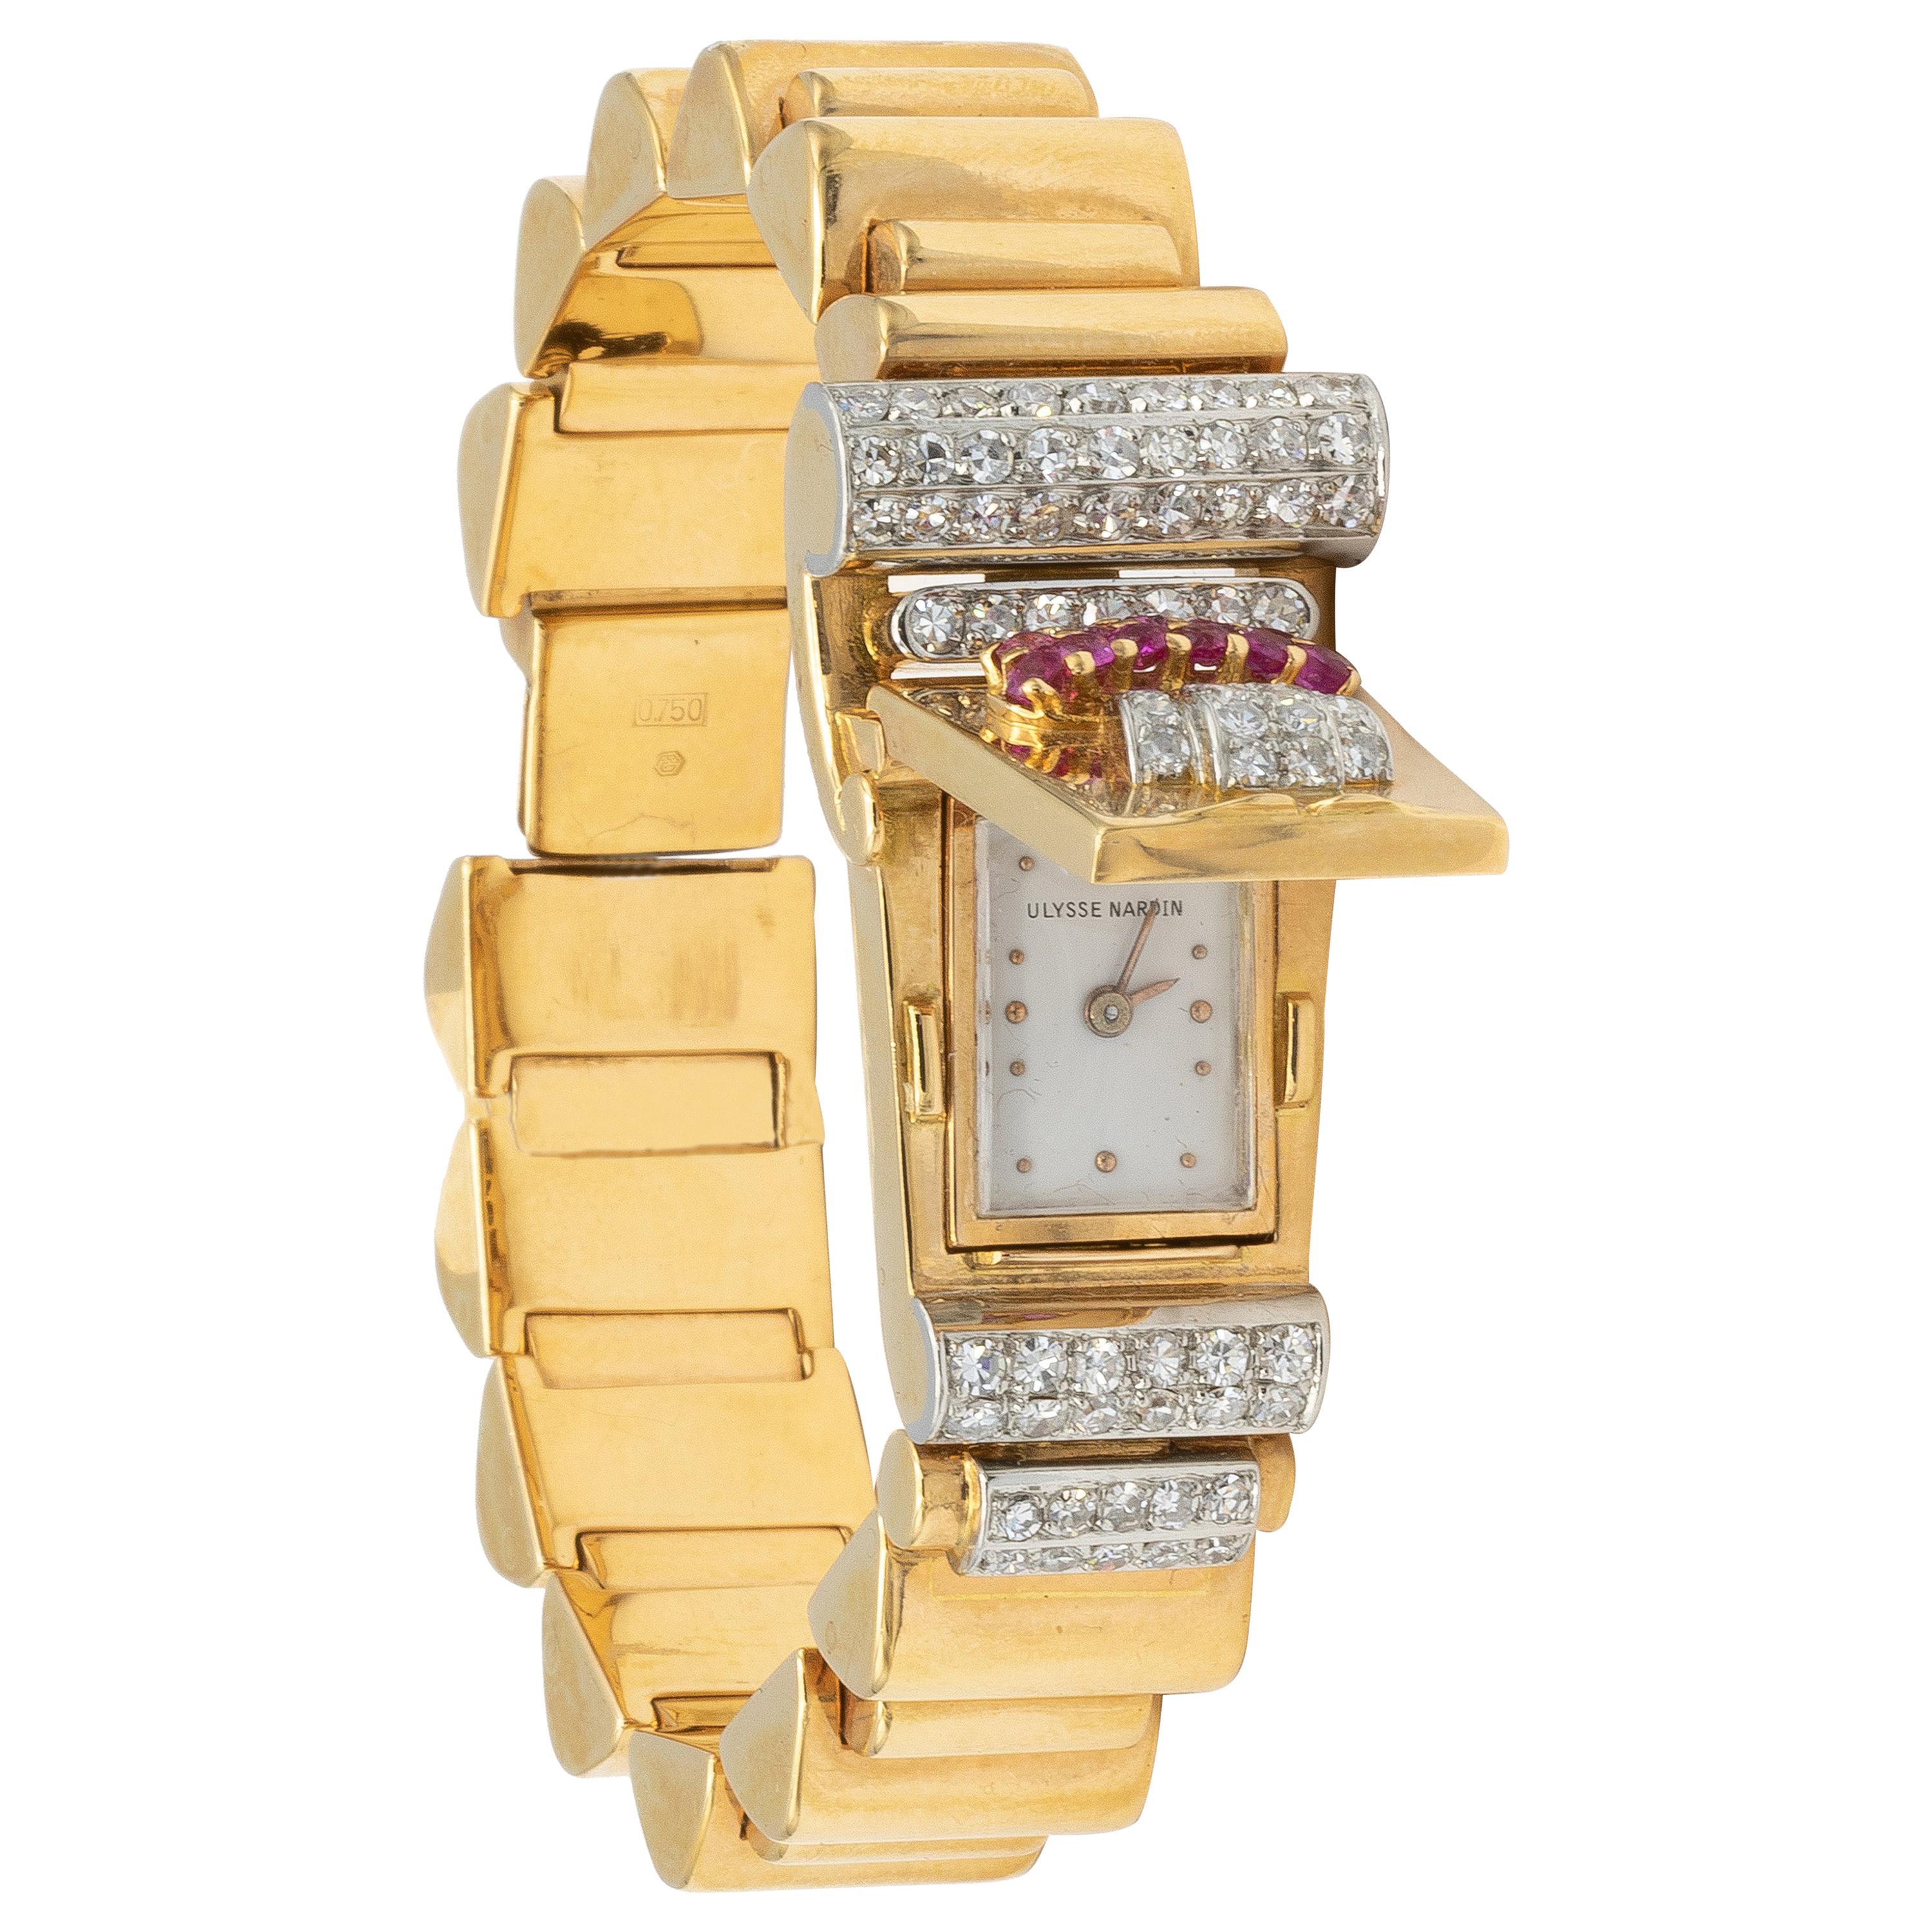 Ulysse Nardin 18K Gold Watch With 1.4 Carats of Diamonds & .4 Carats of Rubies